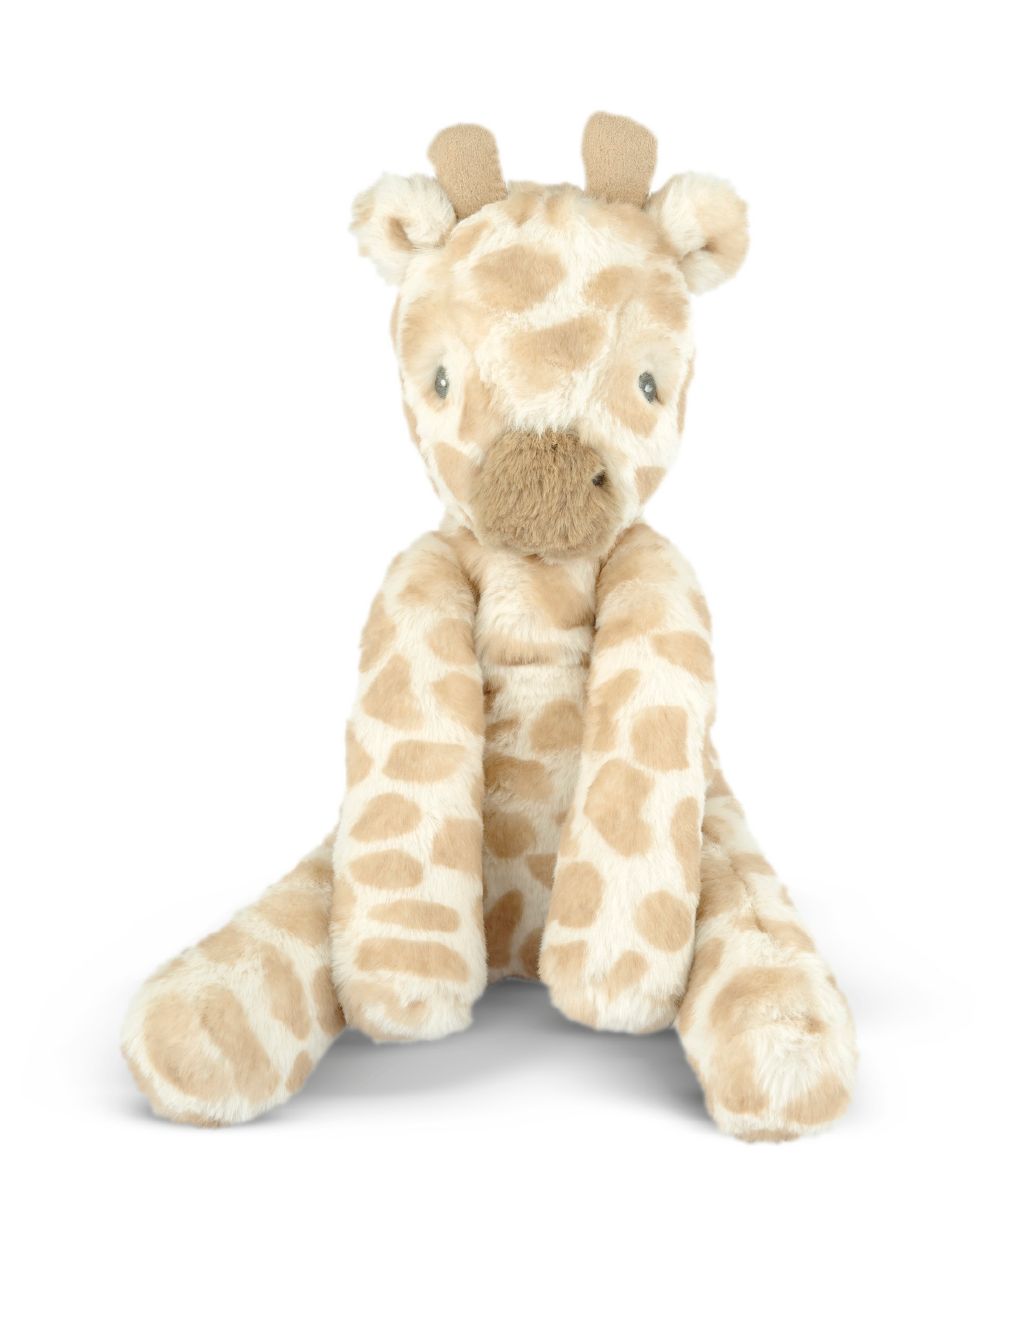 Welcome to the World Small Giraffe Soft Toy